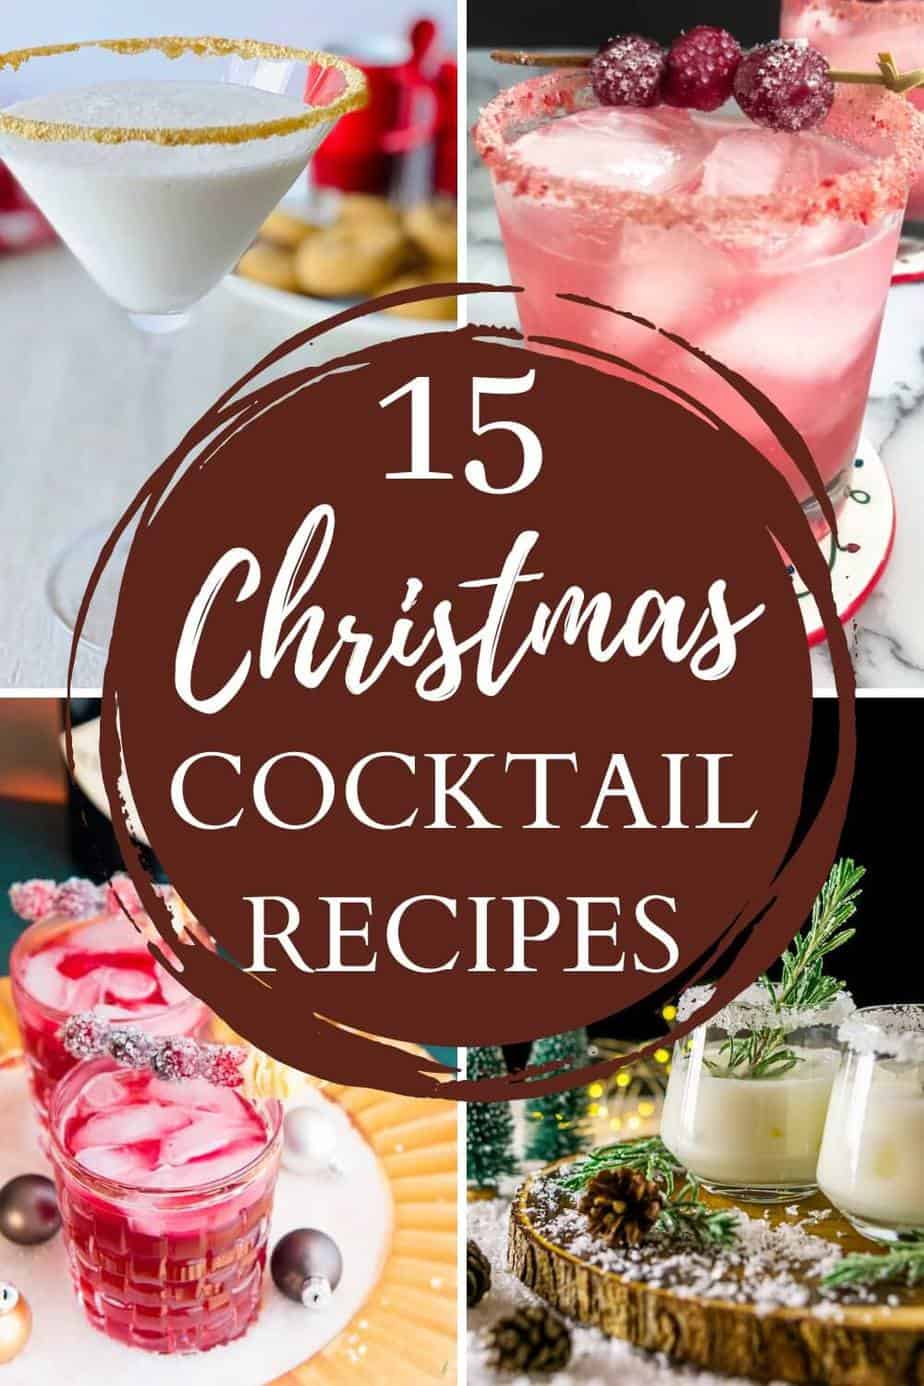 The Best Christmas Cocktail Recipes for Holiday Parties